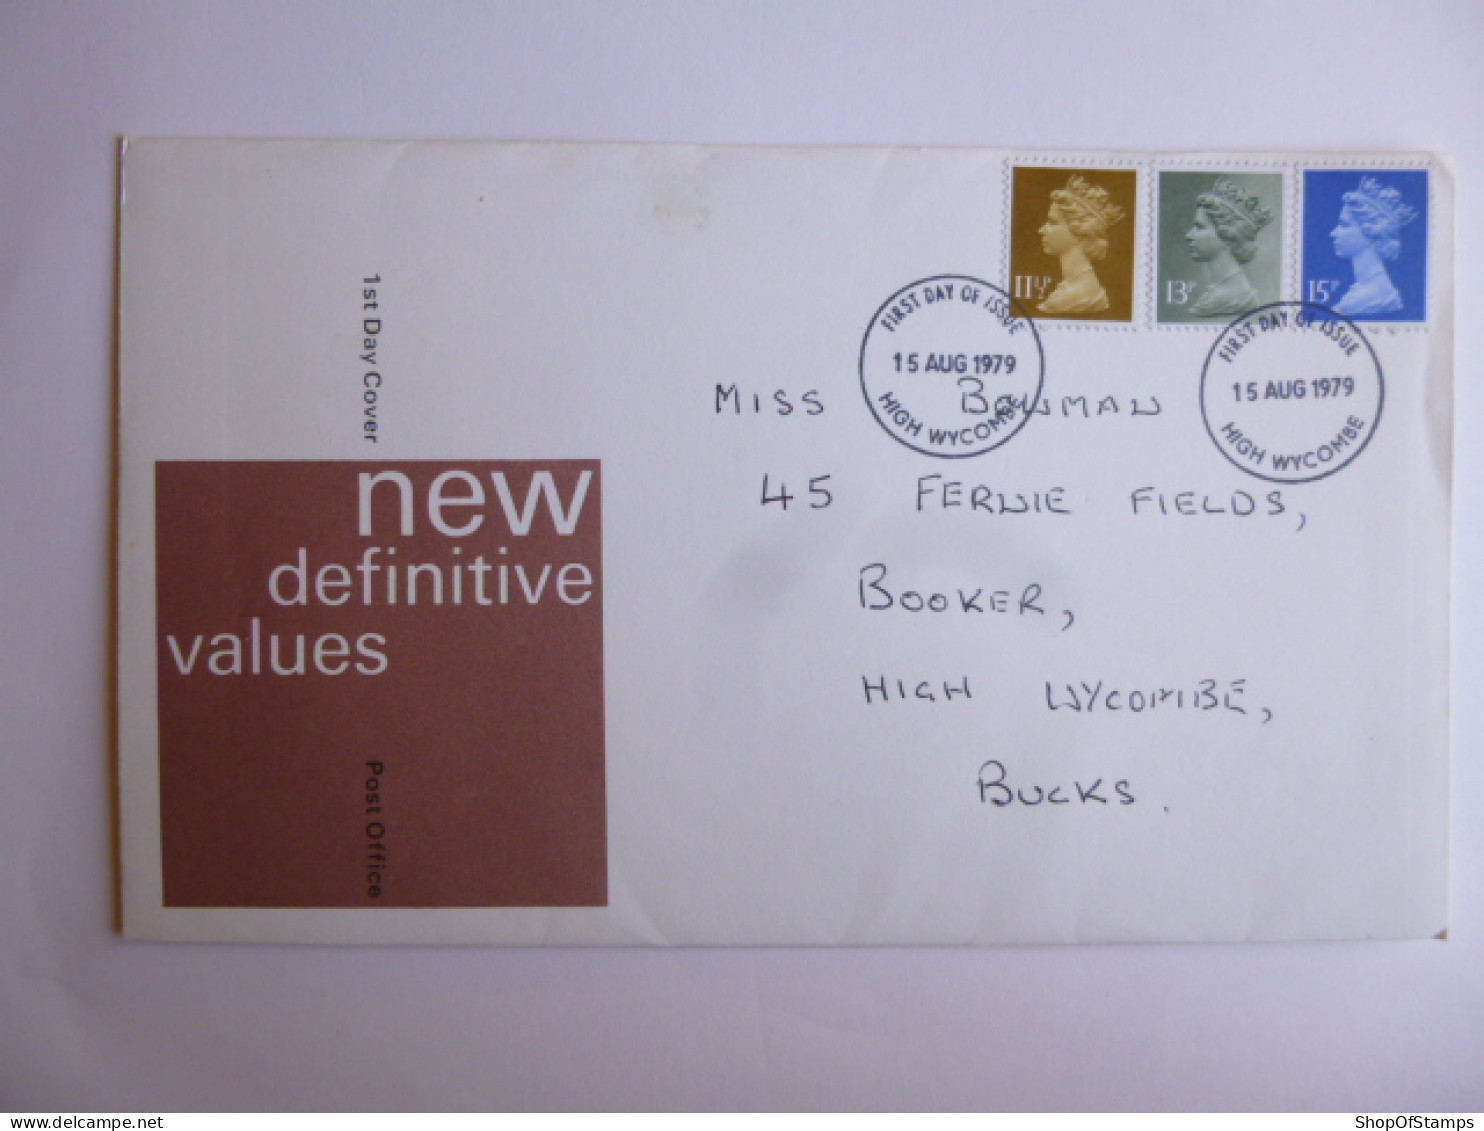 GREAT BRITAIN SG DEFINITIVES ISSUE DATED  15.08.79 FDC  - Unclassified